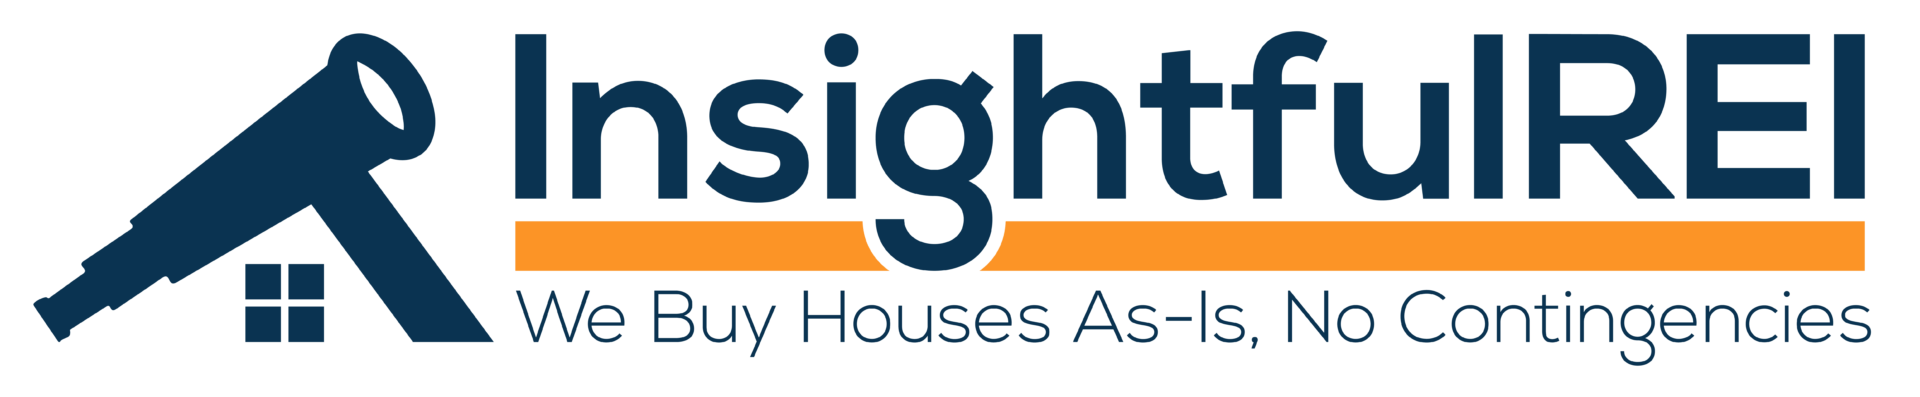 InsightfulREI Offers Quick and Convenient Home Buying Services in Sacramento